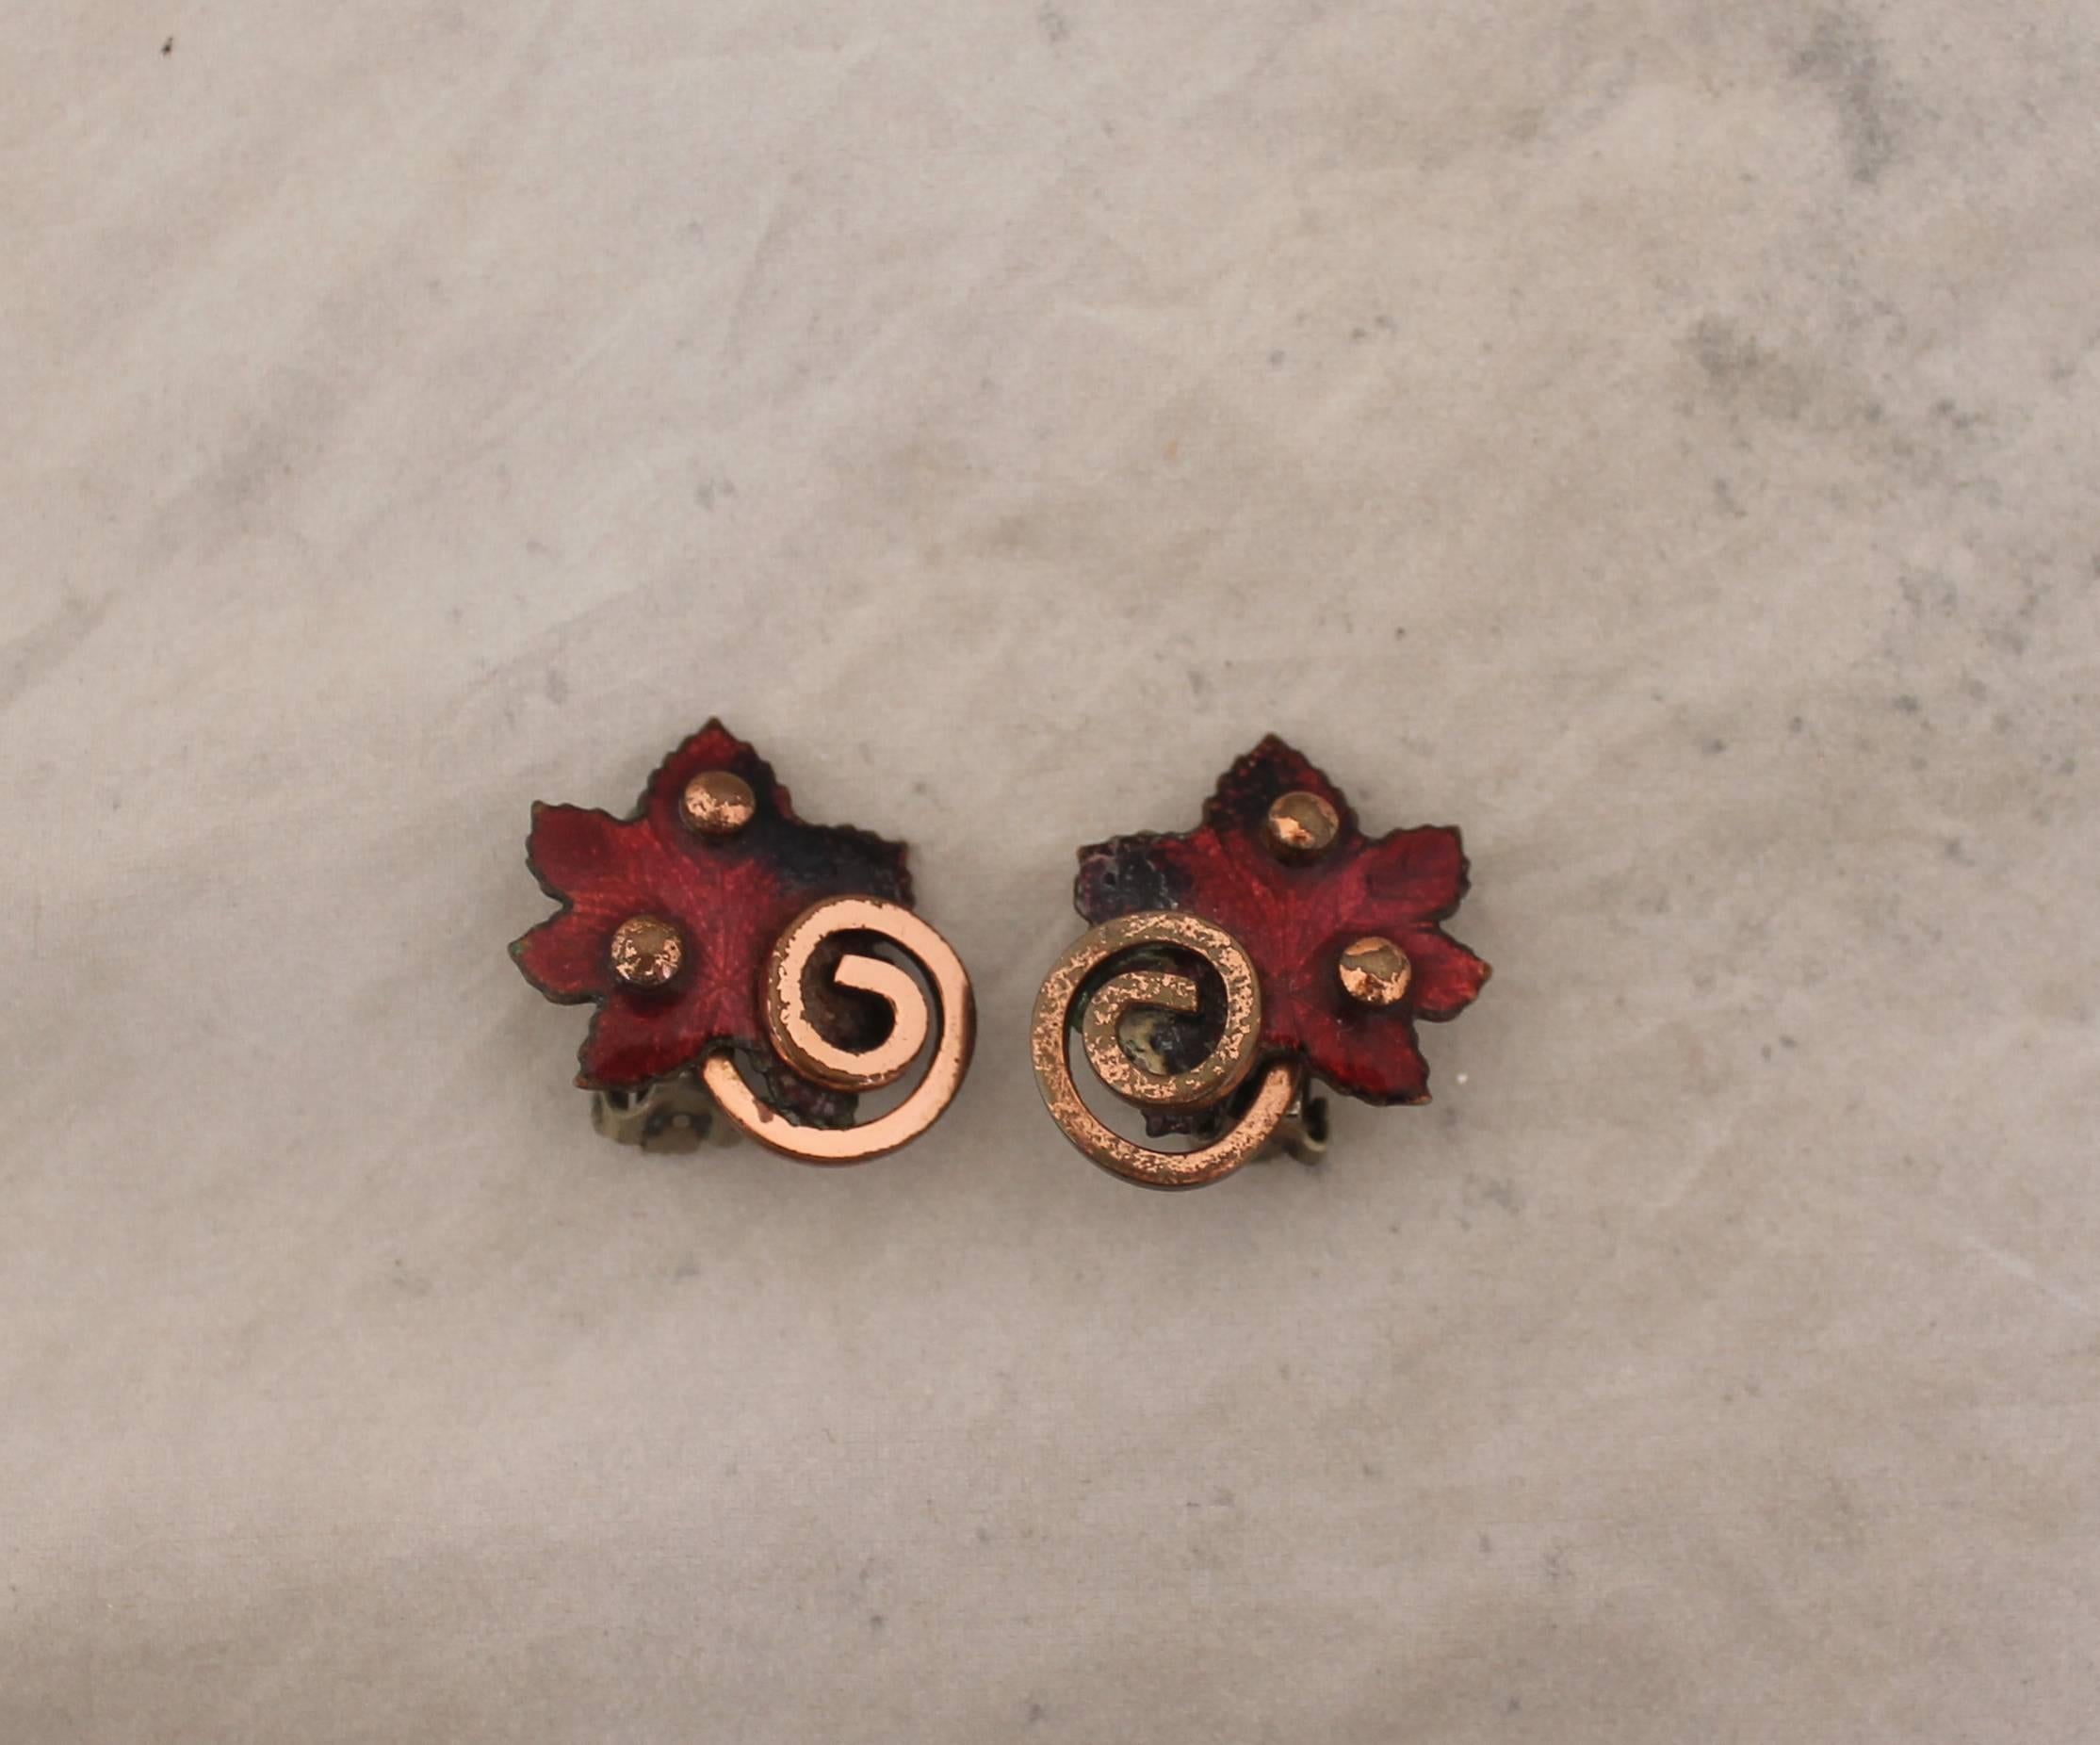 Matisse Vintage Red Enamel & Copper Maple Leaf Clip Earrings & Pin Set - 1950's.  This beautiful clip earrings and pin set is in good vintage condition with only some wear consistent with age.  They feature a maple leaf design with a swirled stem,